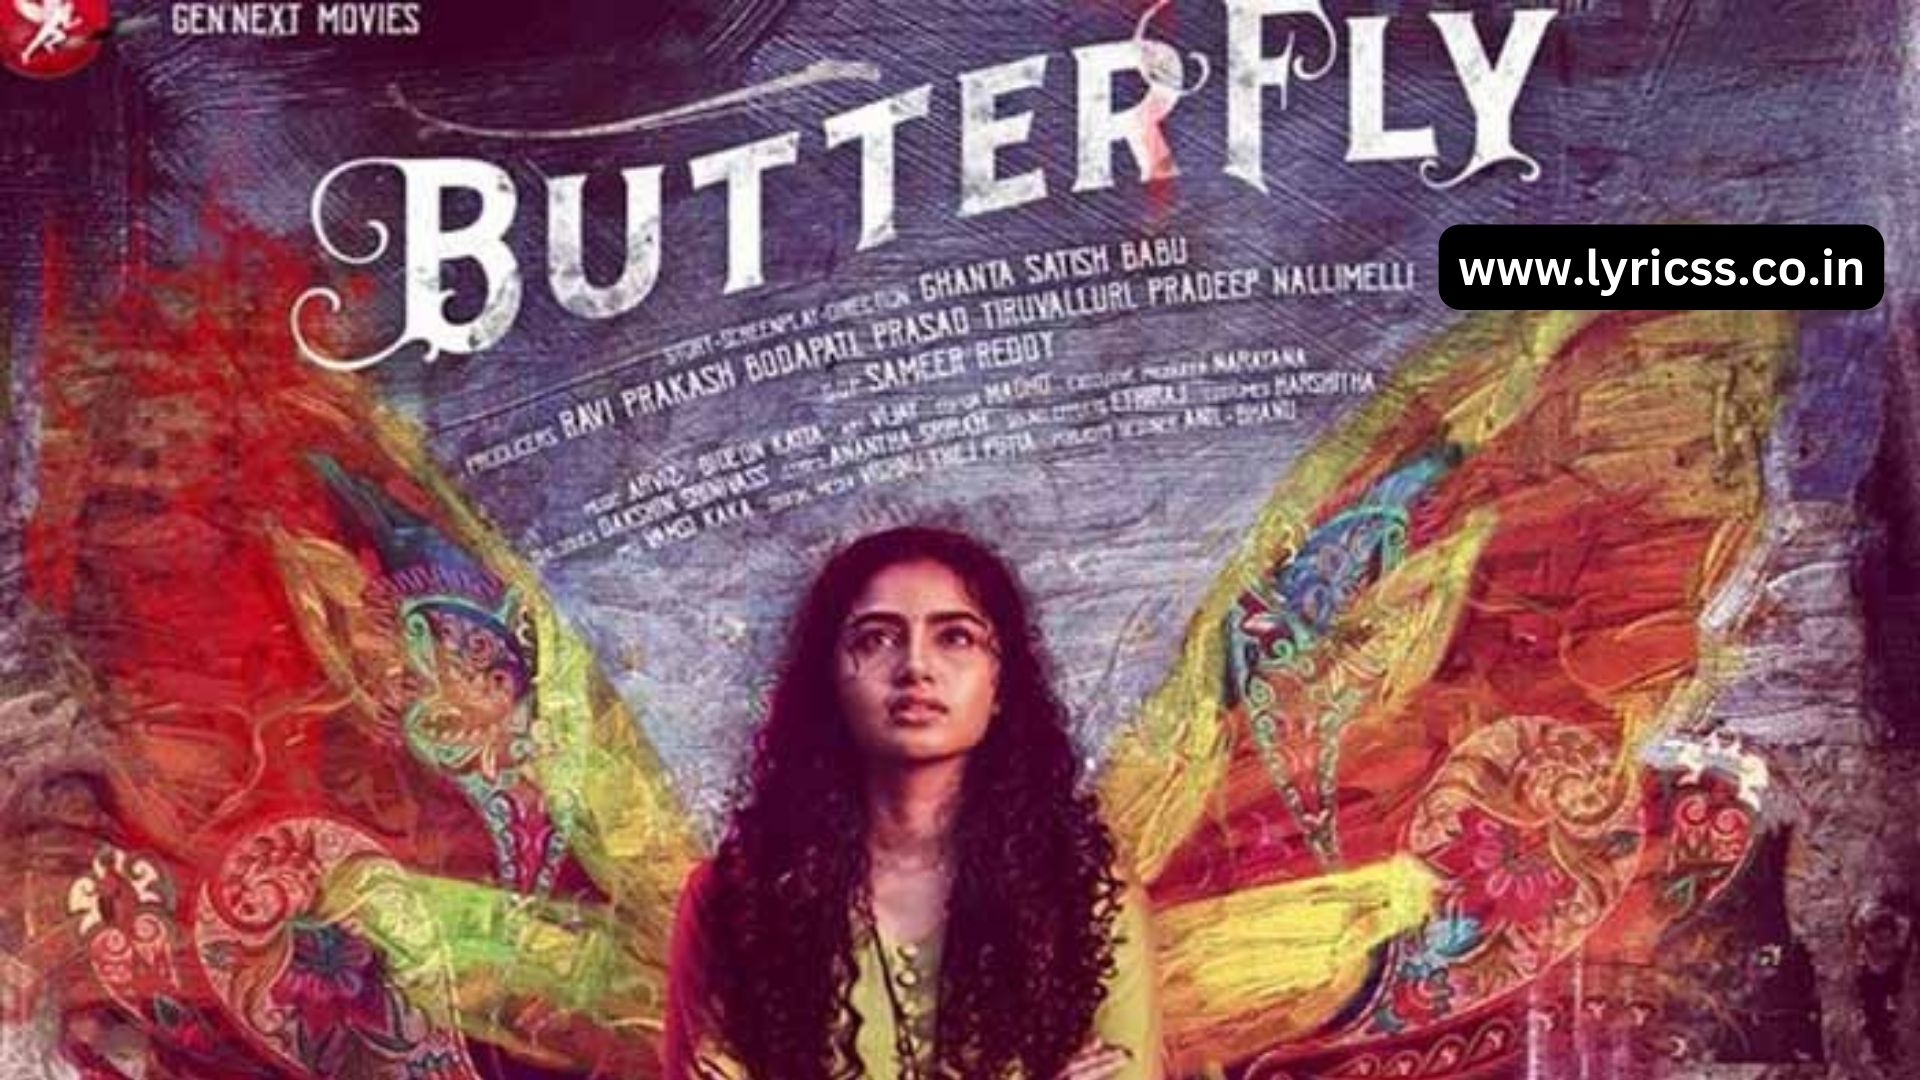 Butterfly Overview | Butterfly News | Butterfly Cast | Butterfly Trailers & clips | Butterfly Behind the scenes | Butterfly Reviews | Butterfly Movie Telugu | Butterfly 2022 | Butterfly Release Date